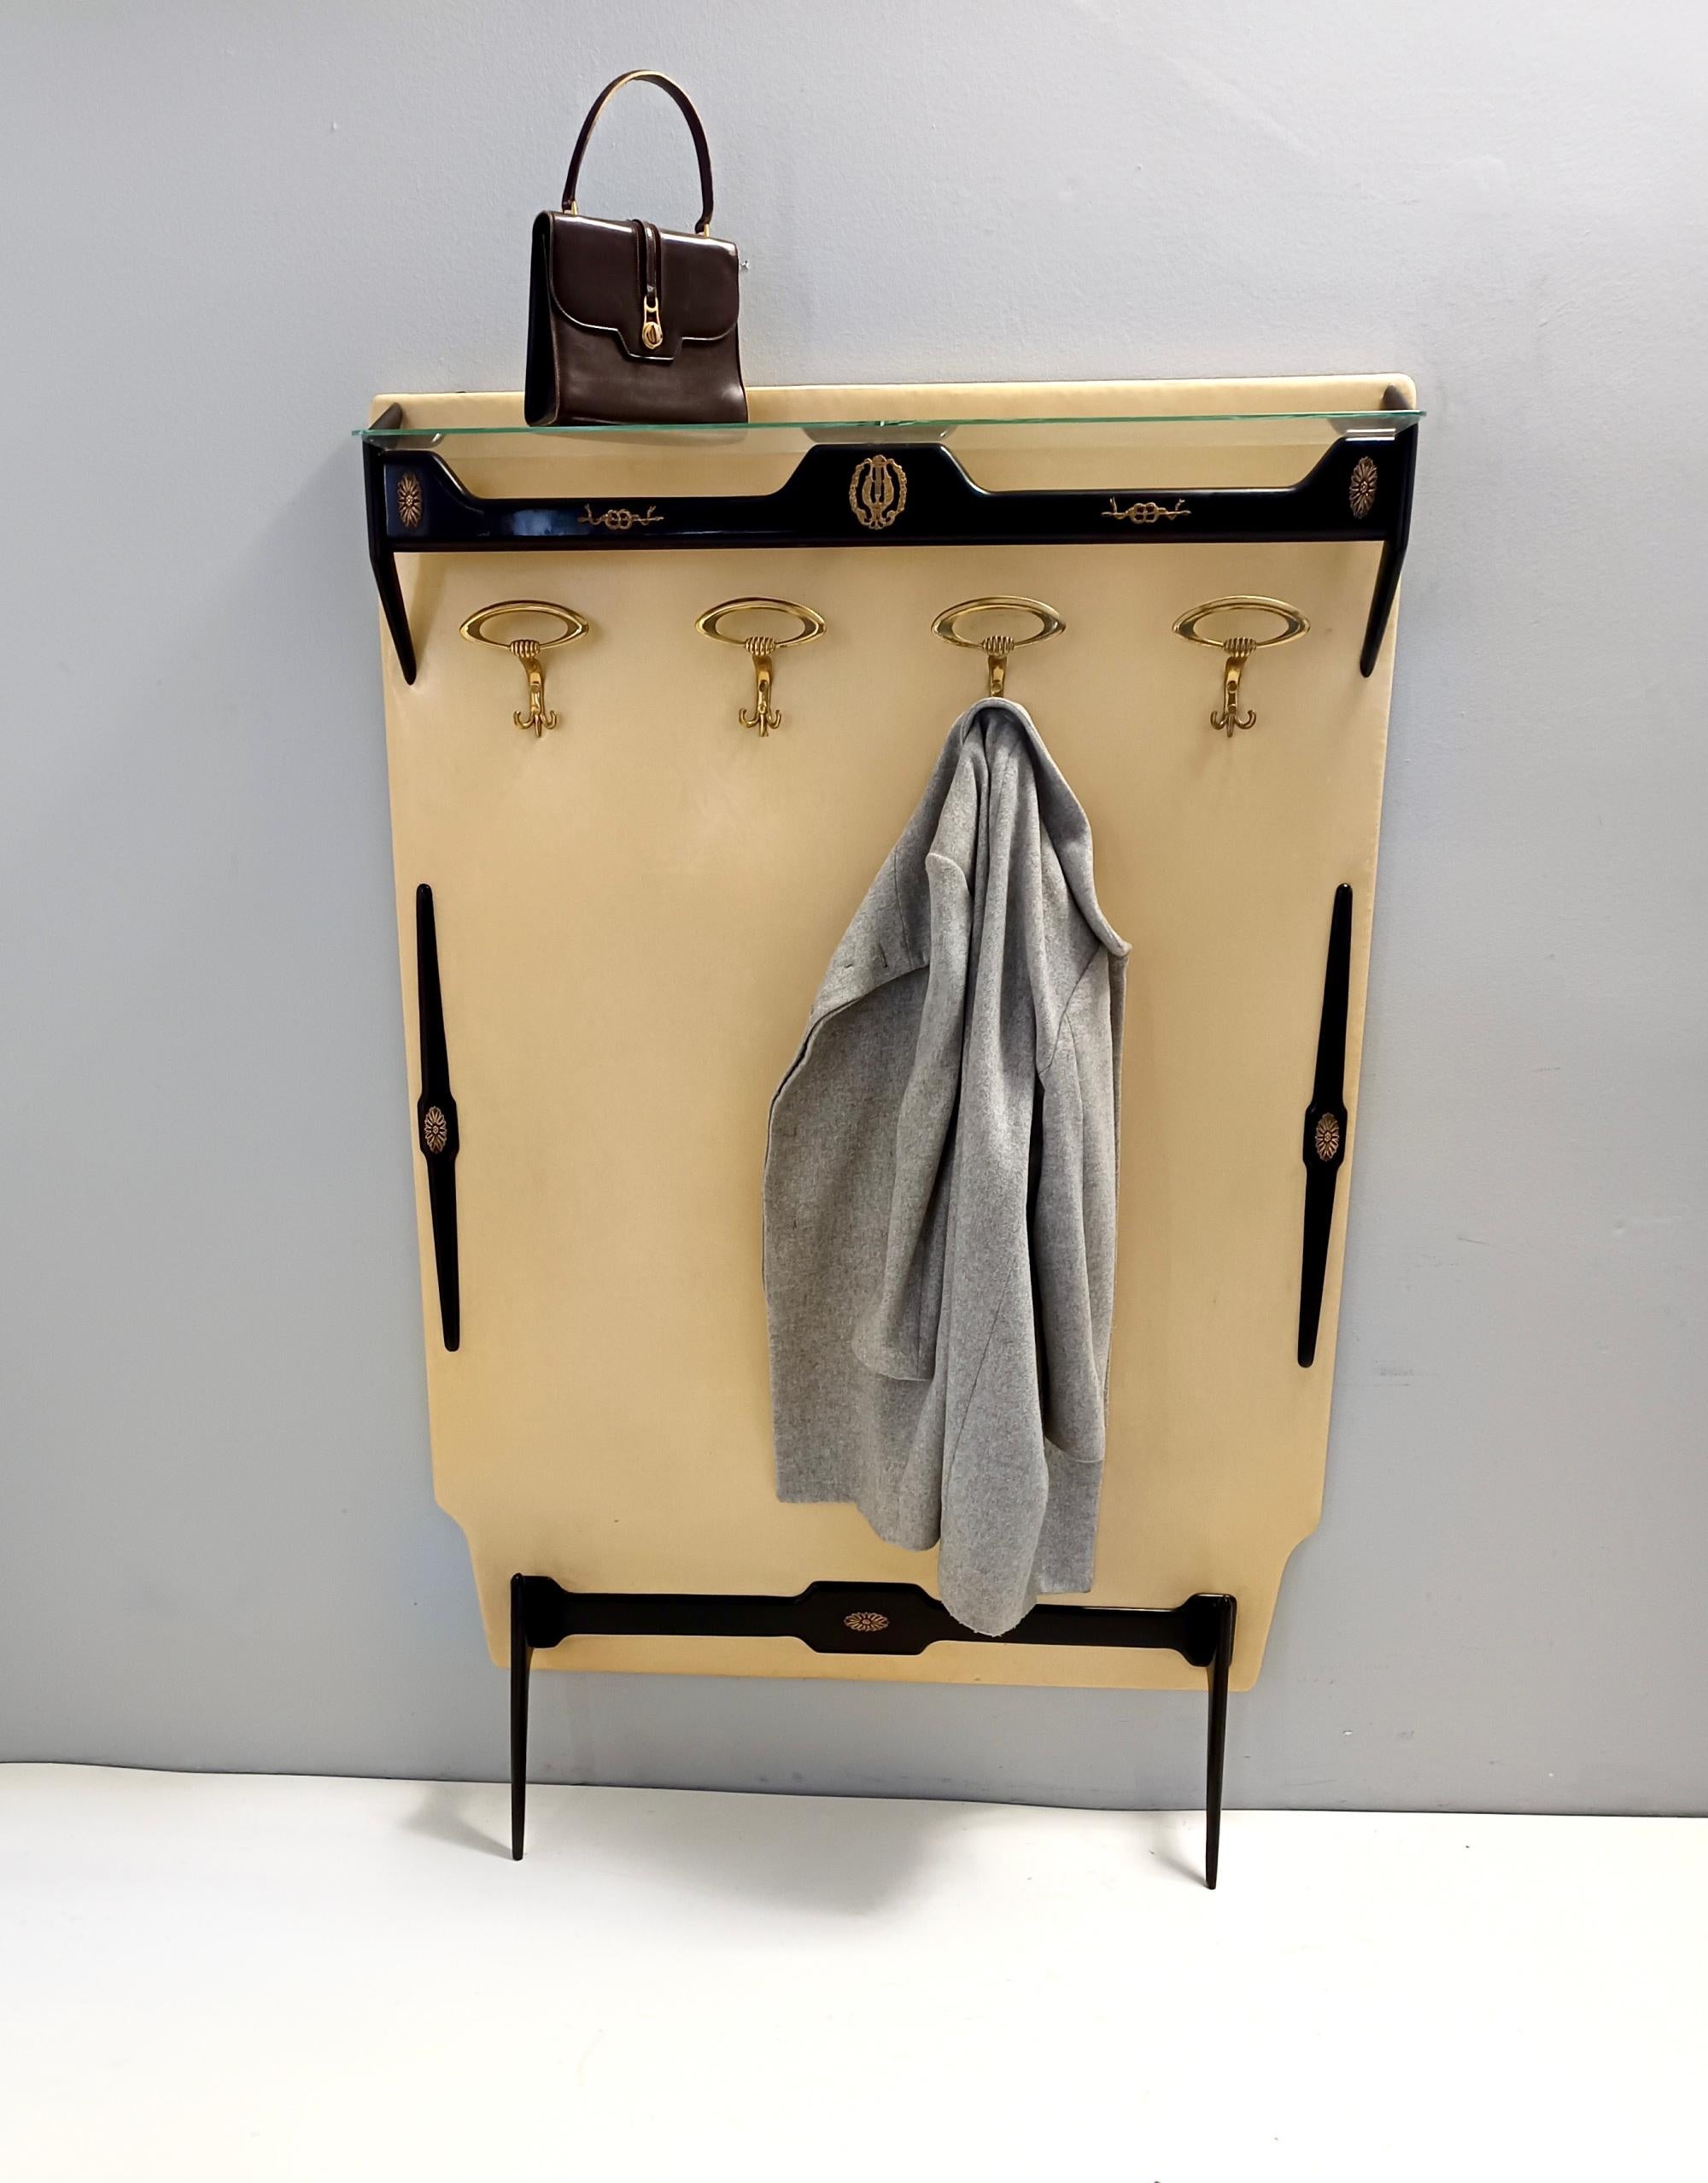 Made in Italy, 1950s.
It is made in ebonized beech, brass and glass and features a skai covered panel.
This is a vintage piece therefore it might show slight traces of use, but it can be considered as in very good original condition and ready to